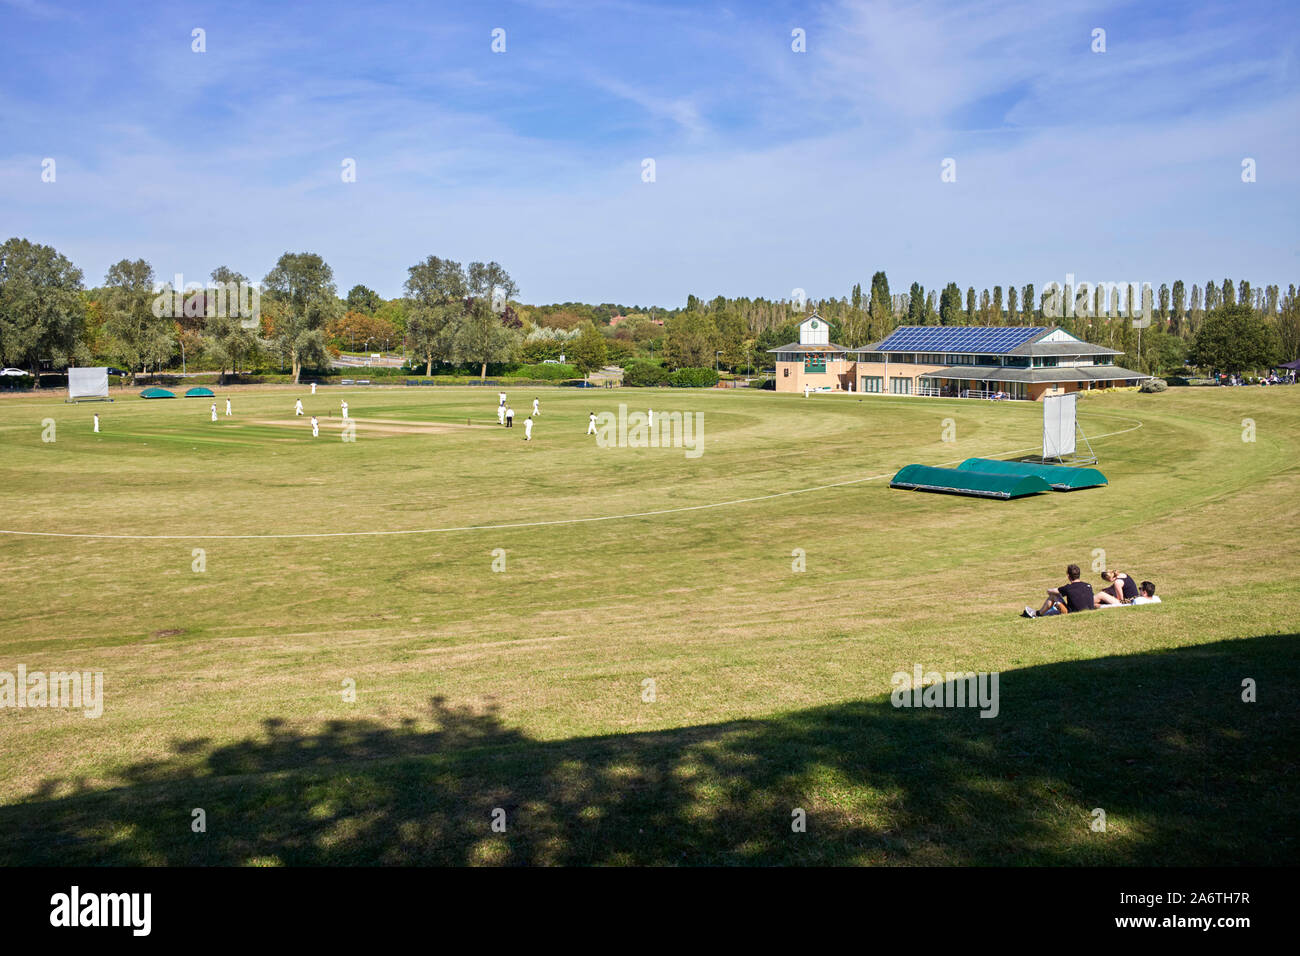 A game of cricket in progress at the Campbell Park cricket ground in Milton Keynes, Bedfordshire Stock Photo